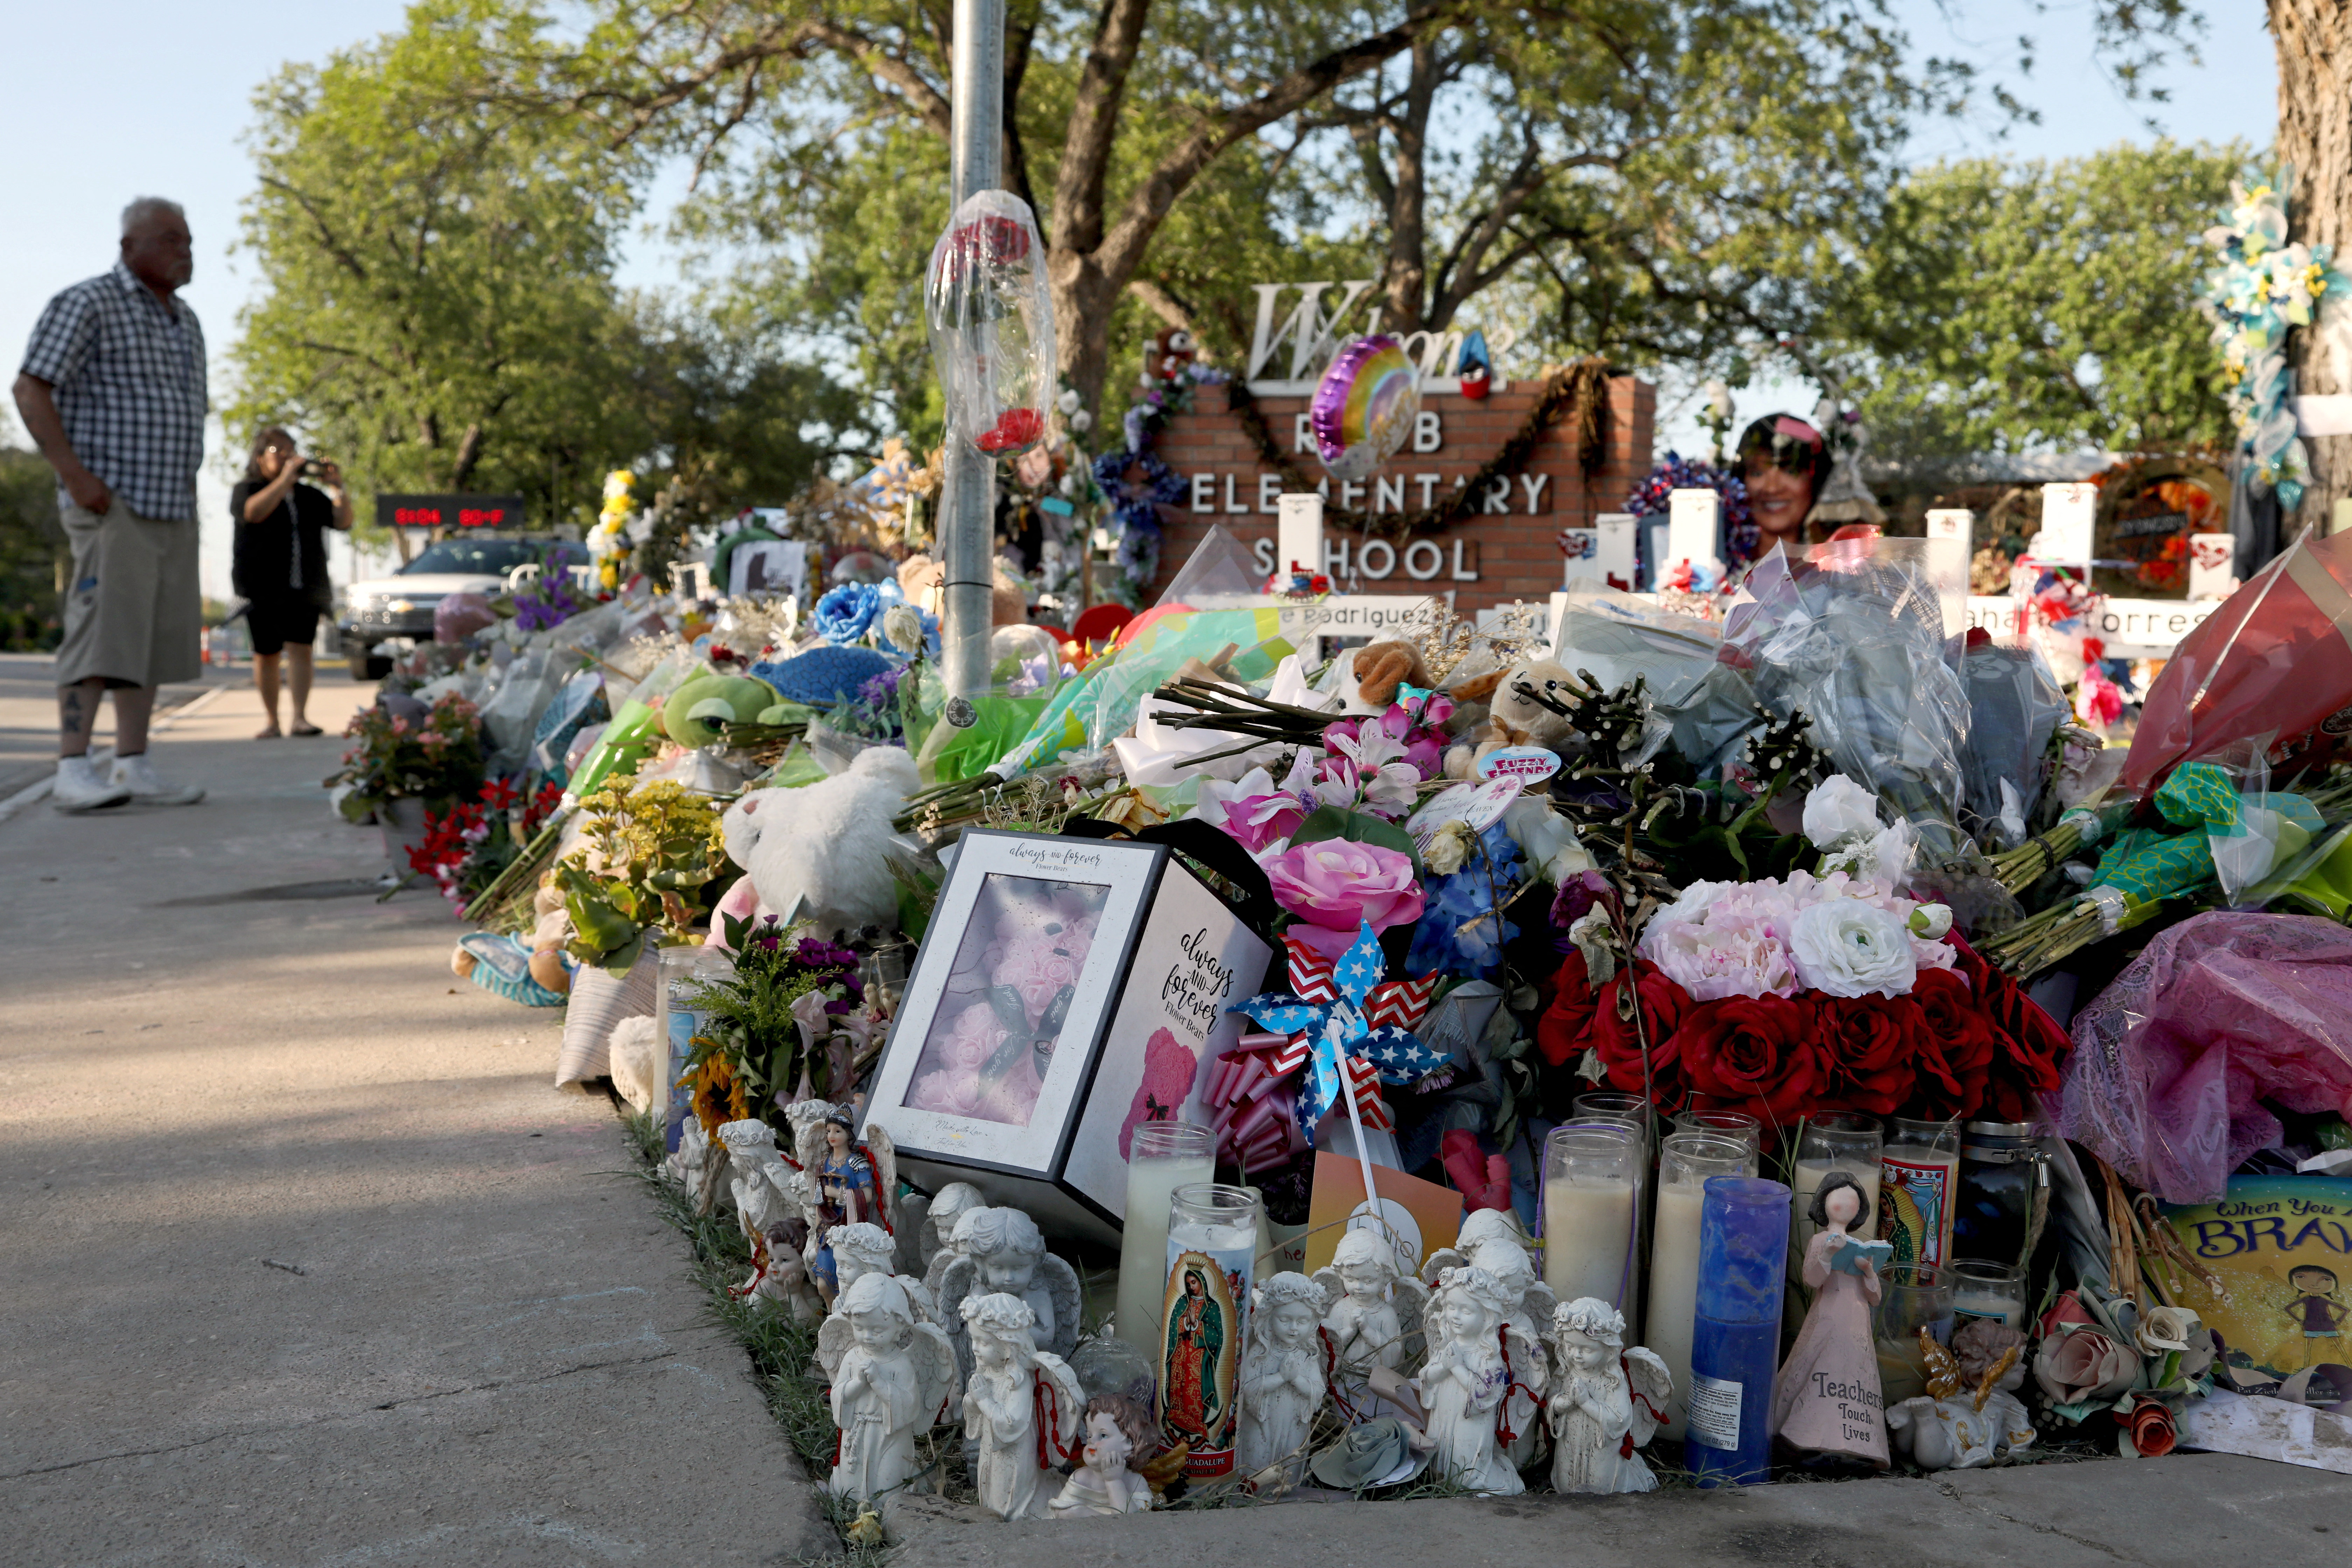 View of the memorial for victims of the Uvalde school shooting